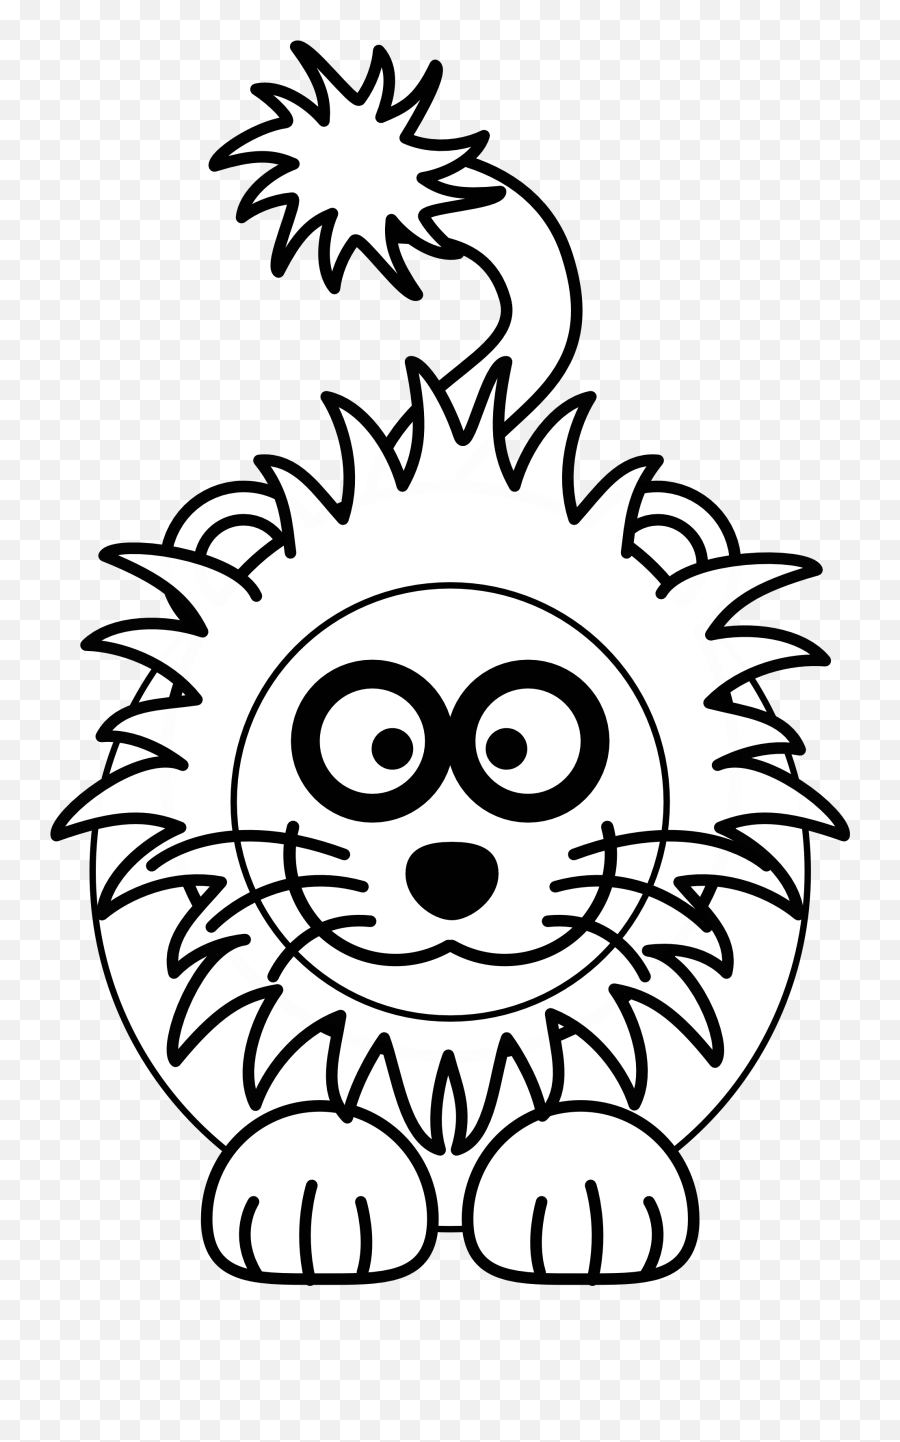 Mountain Lion Png - Clipart Royalty Free Download Baby Panda Cartoon Lion Black And White,Baby Lion Png